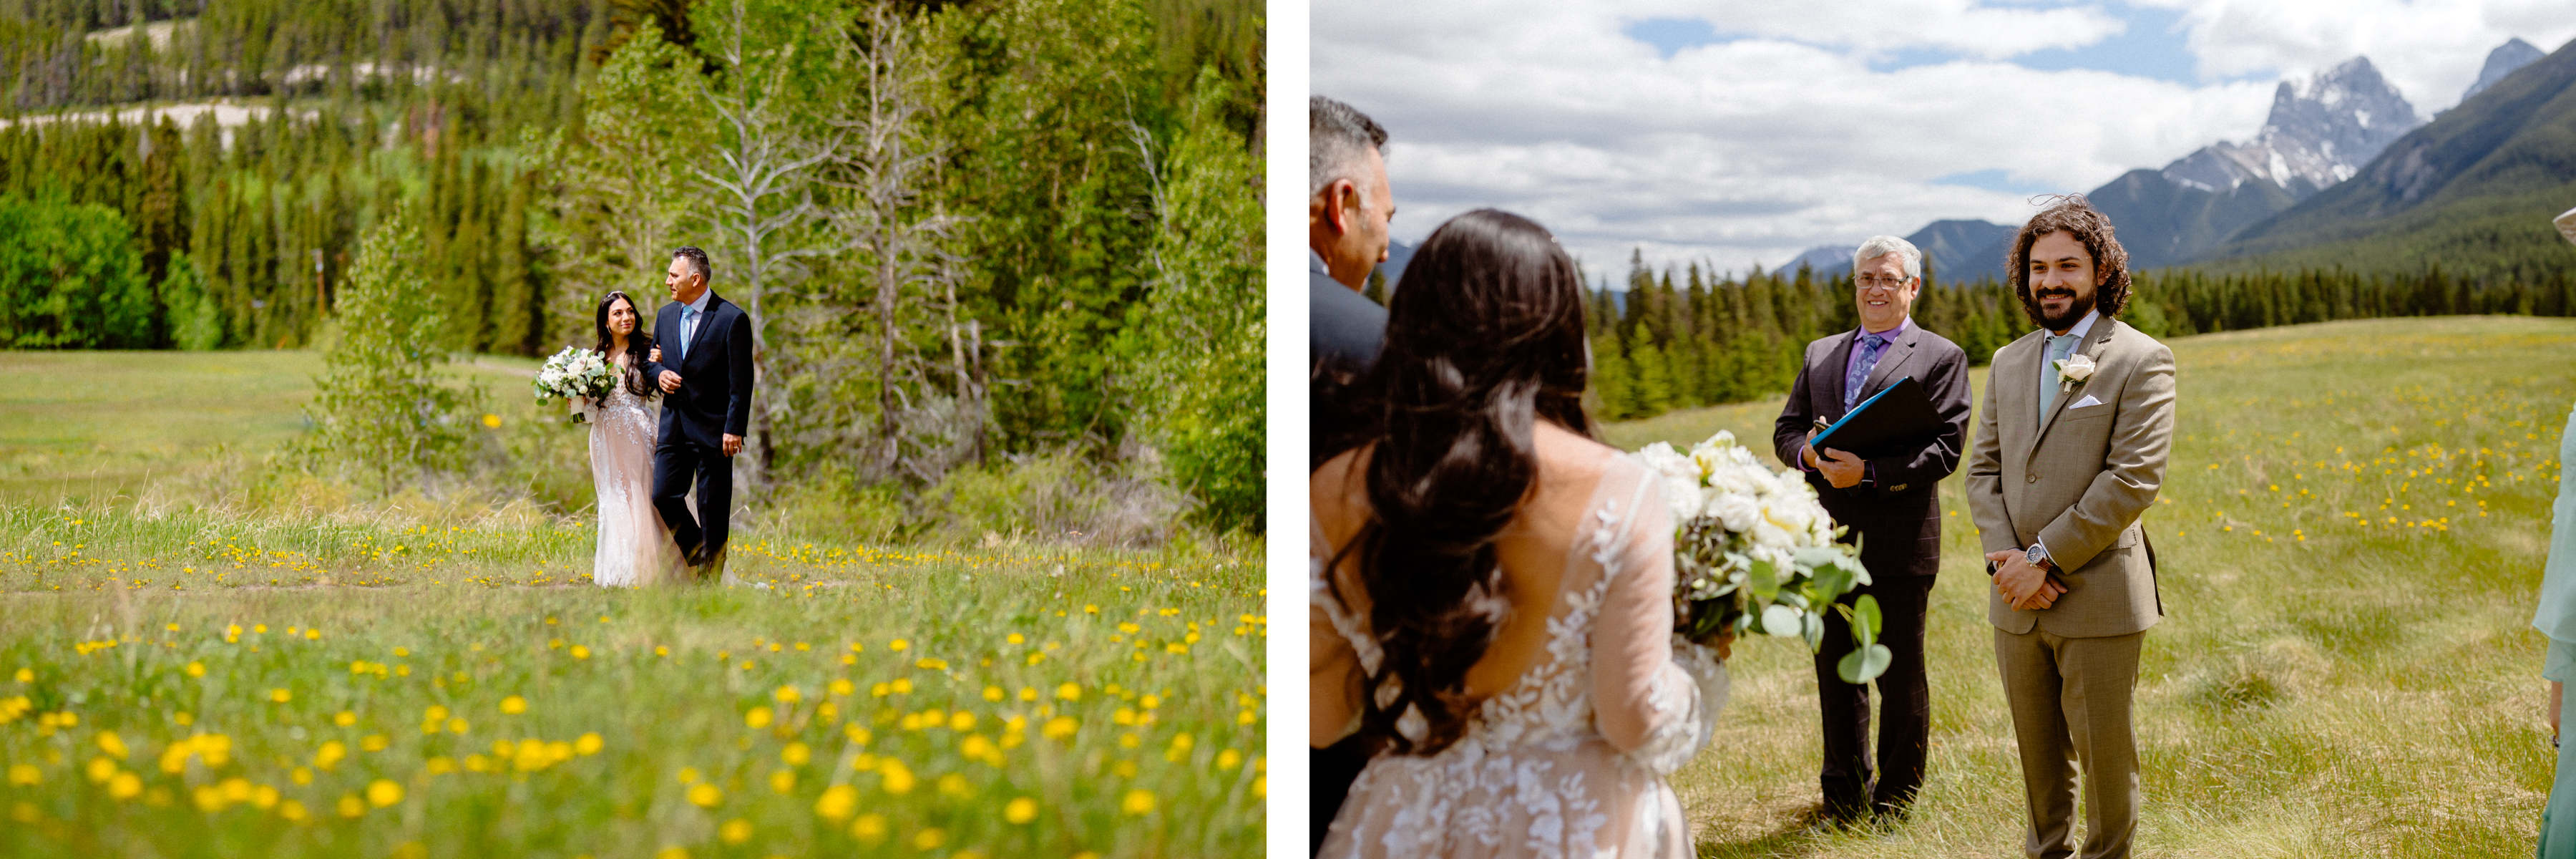 Canmore Elopement Photographers - Image 7